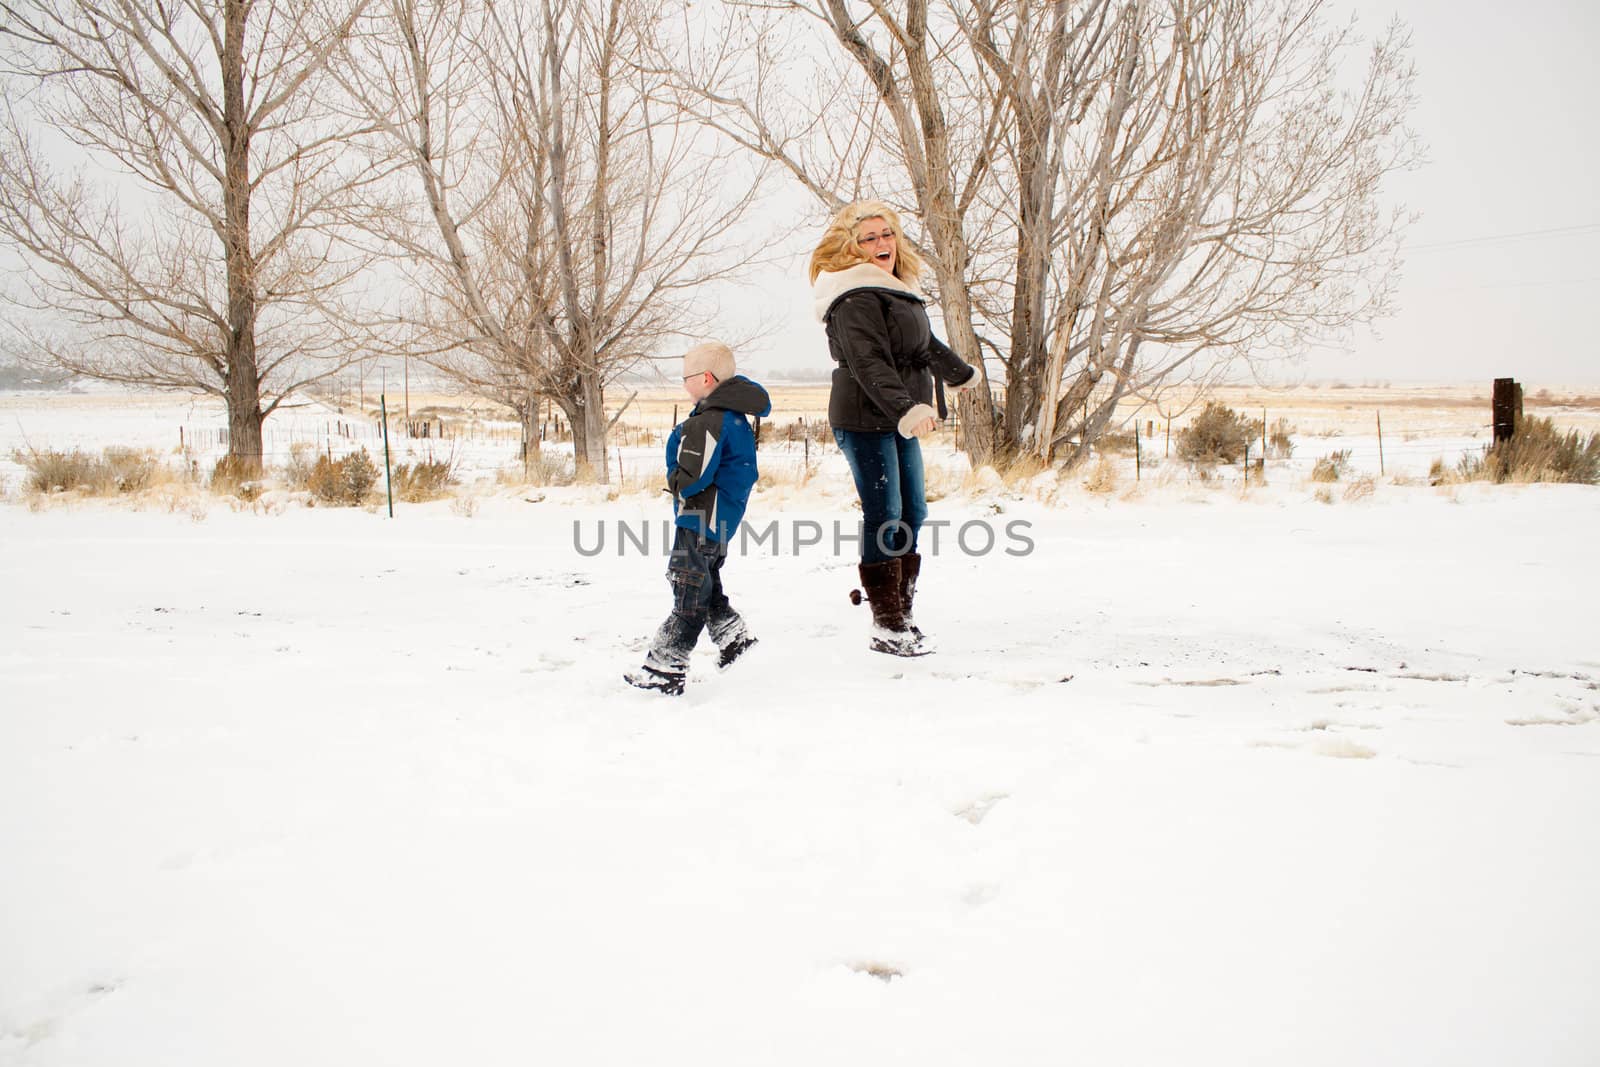 A mother and son jumping in the snow, playing and having fun.